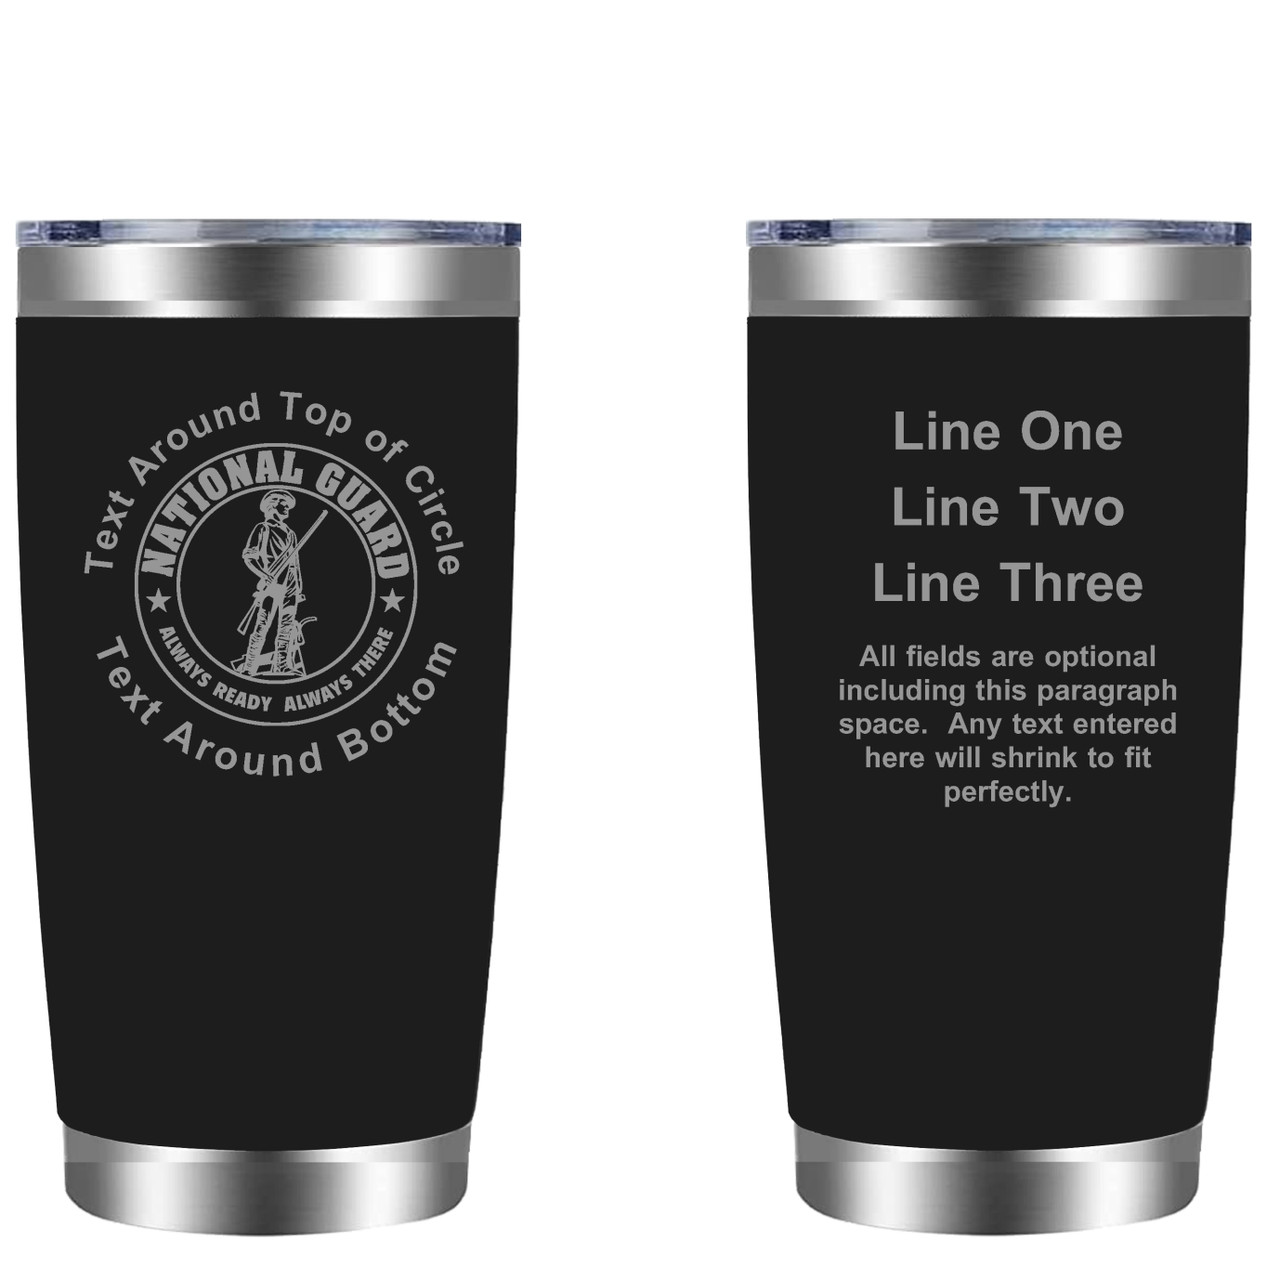 Custom Personalized Stainless Steel Tumblers for Bar and Bat Mitzvah